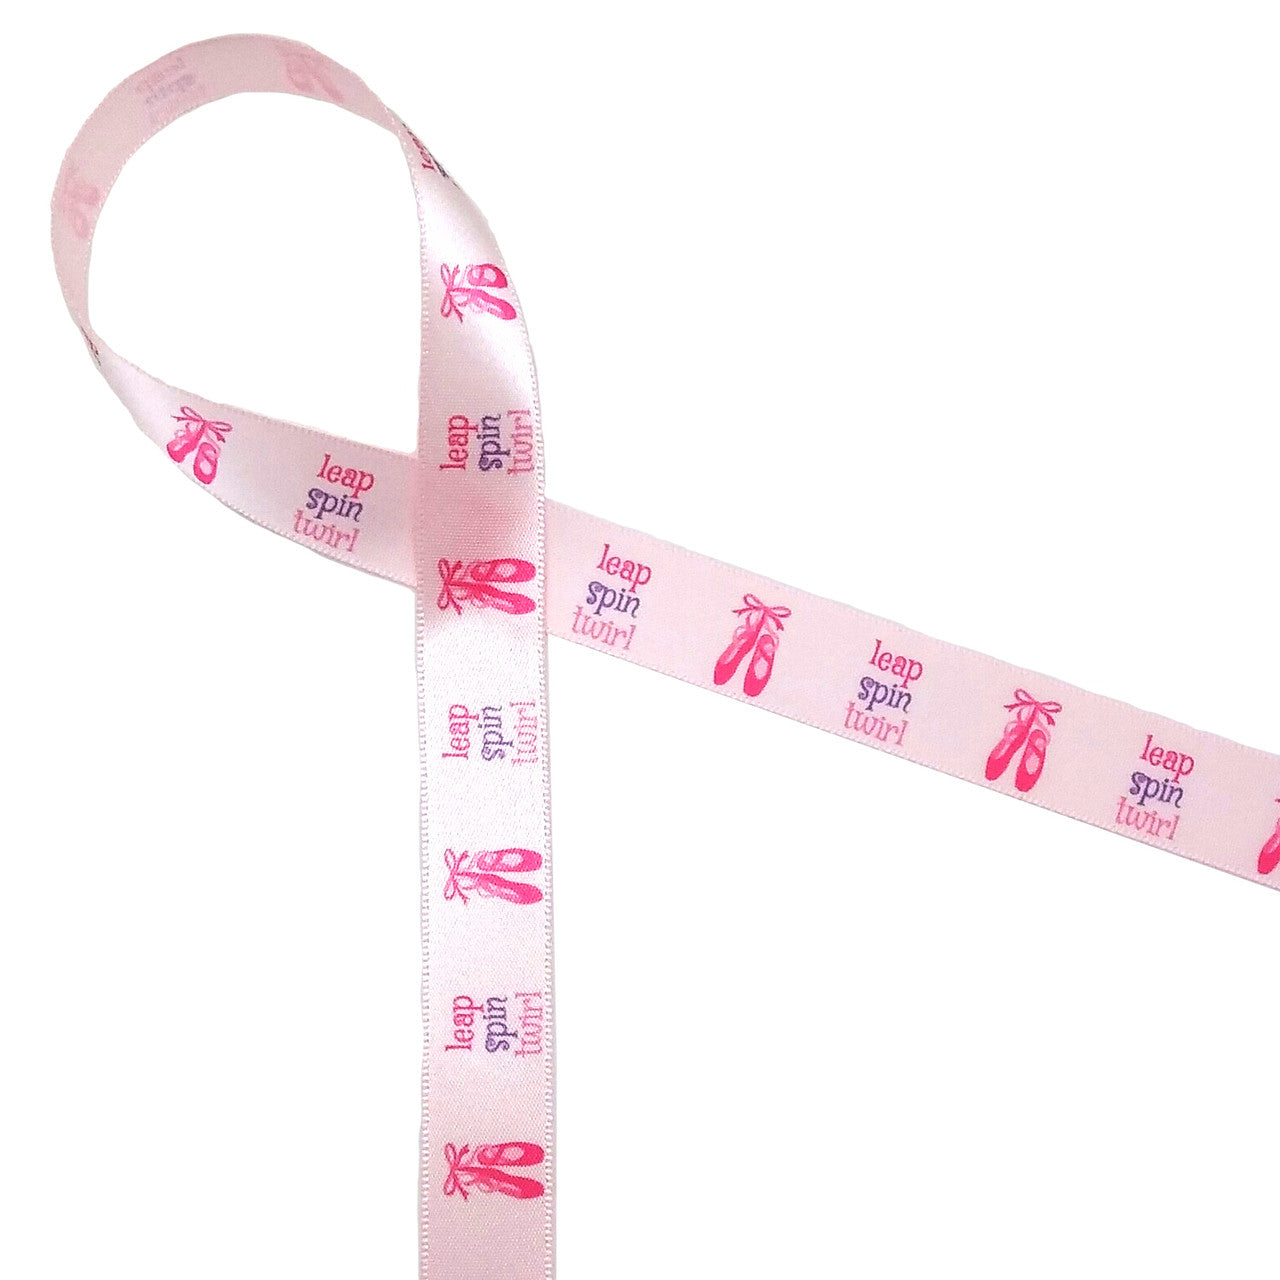 Make the most of the post recital party with this sweet ballet themed ribbon on favors, gifts and flowers!